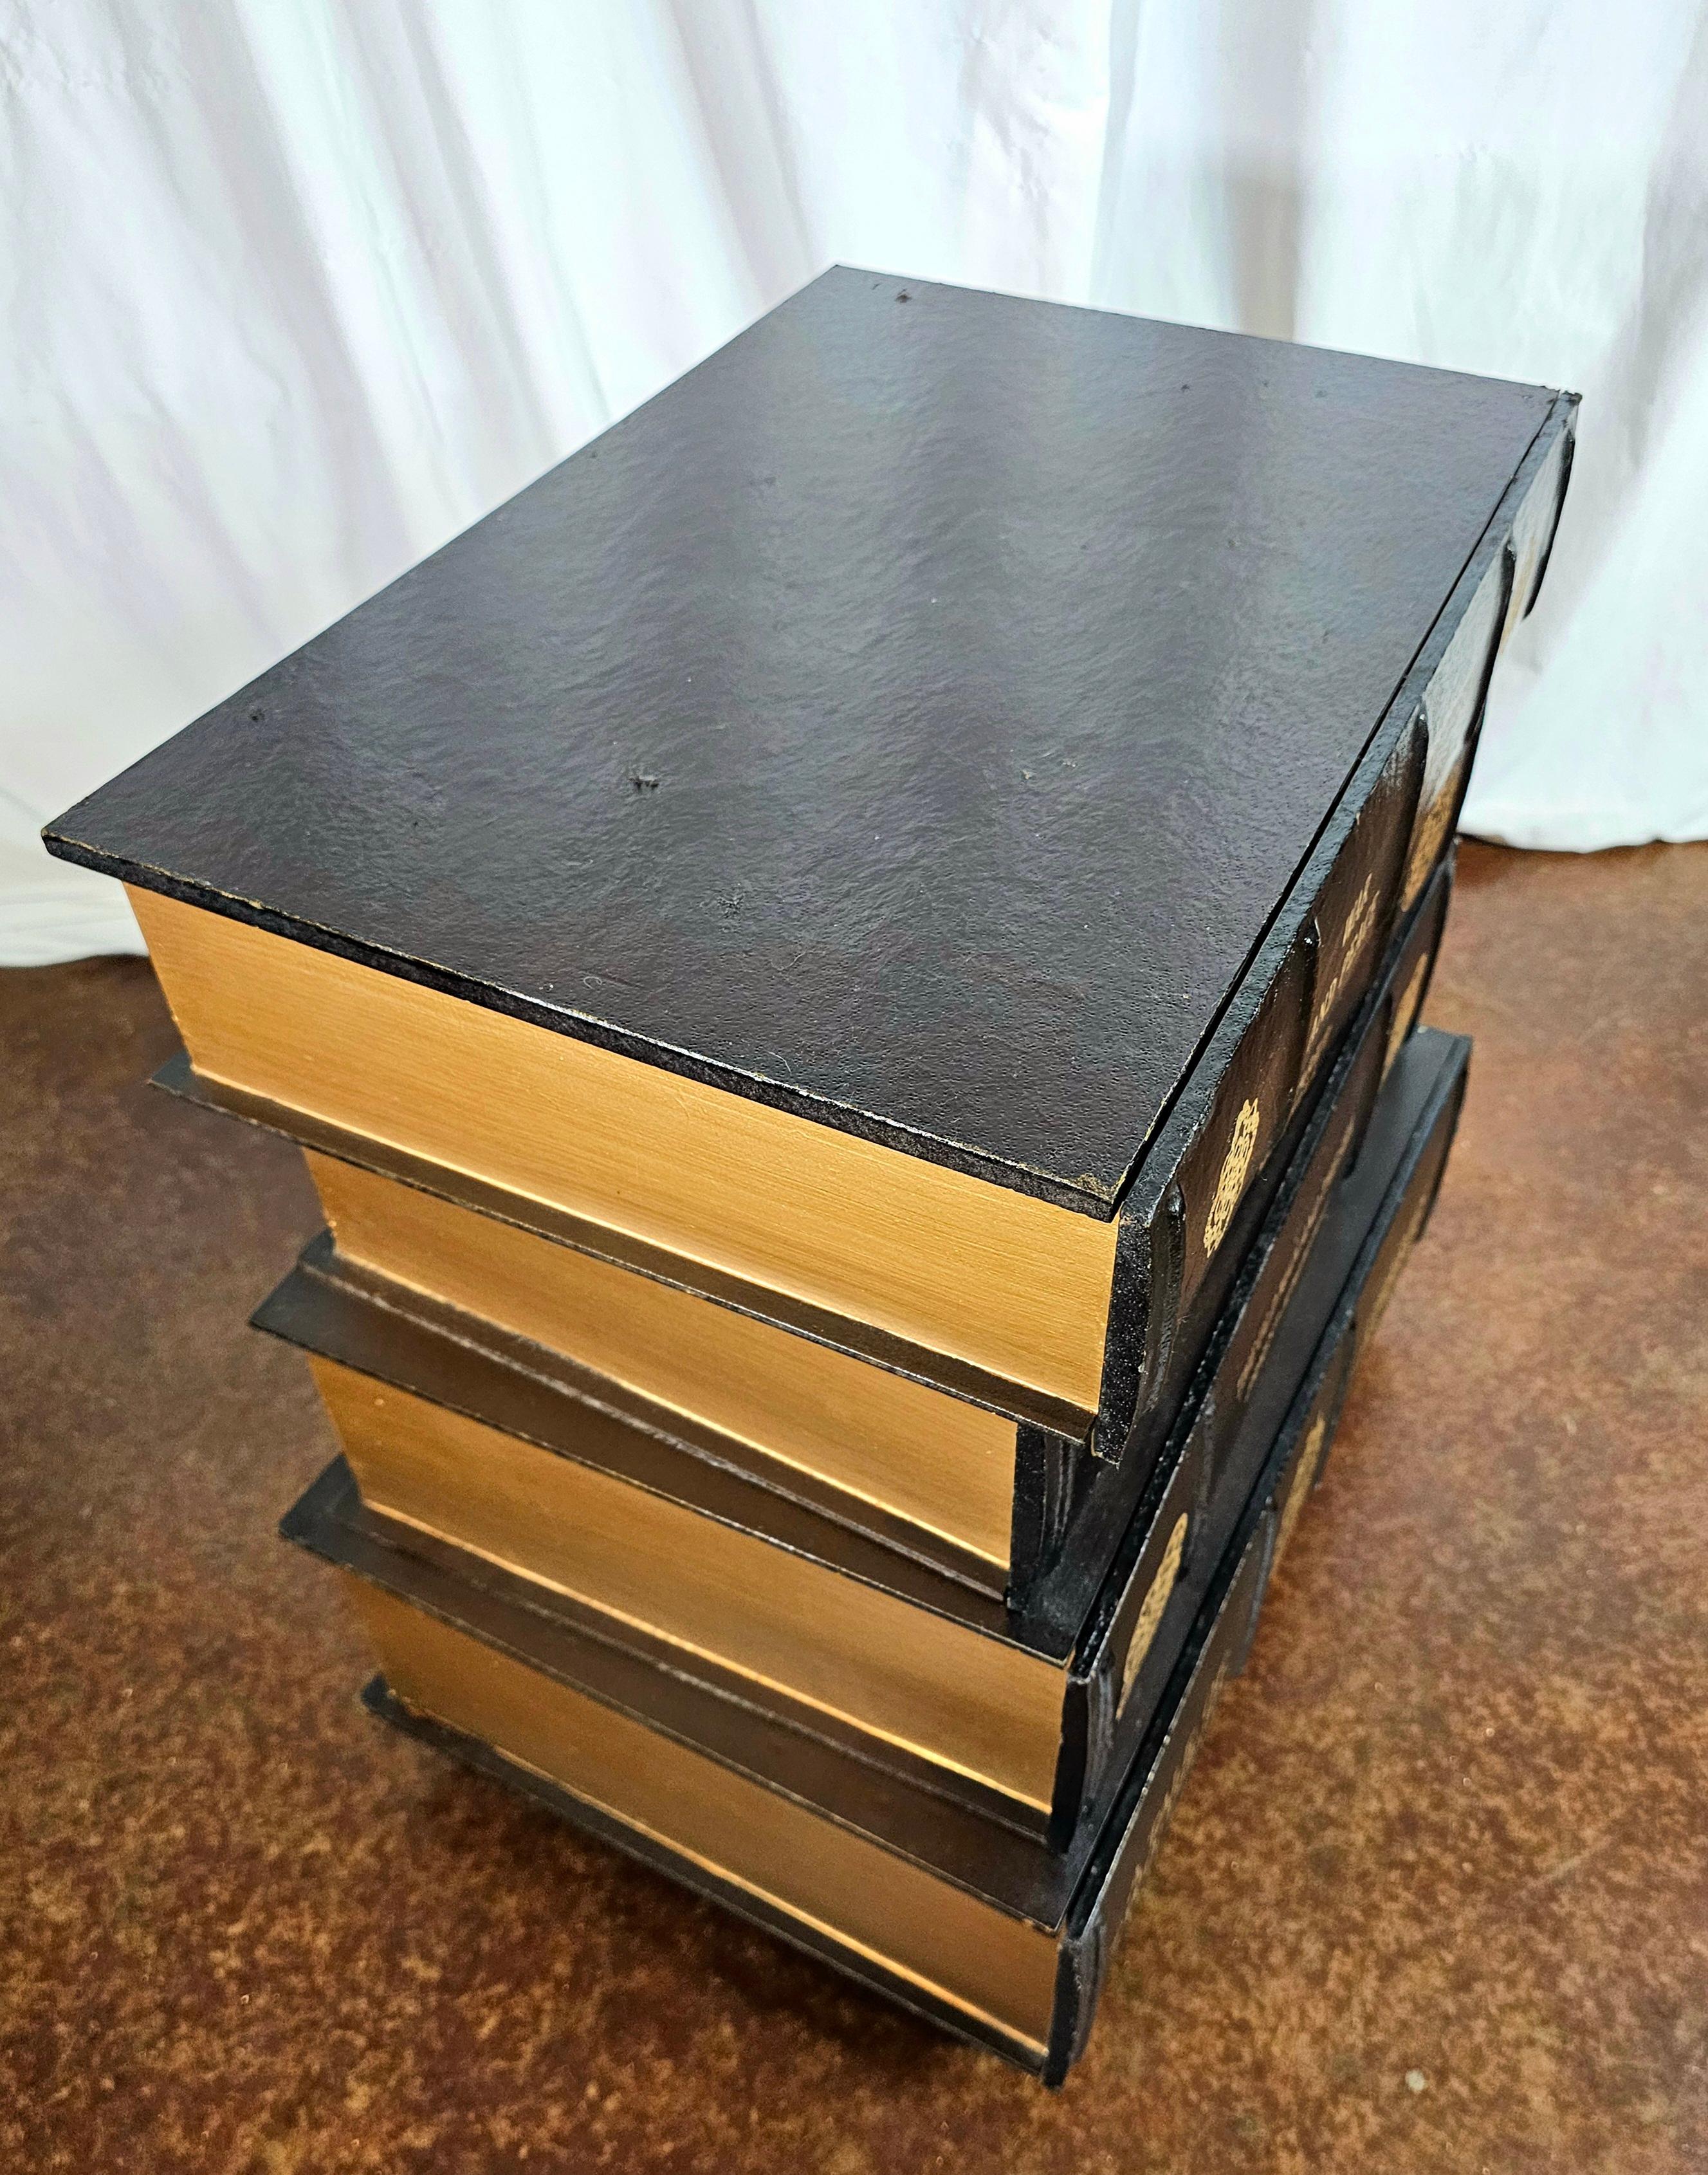 Vintage figurative stack of books end table. 
Adds charm and character to any room. 
Perfect for any bibliophile. 
Decorative book-design side table keeps remotes, reading materials and other items handy by your favorite chair.

4 drawers for